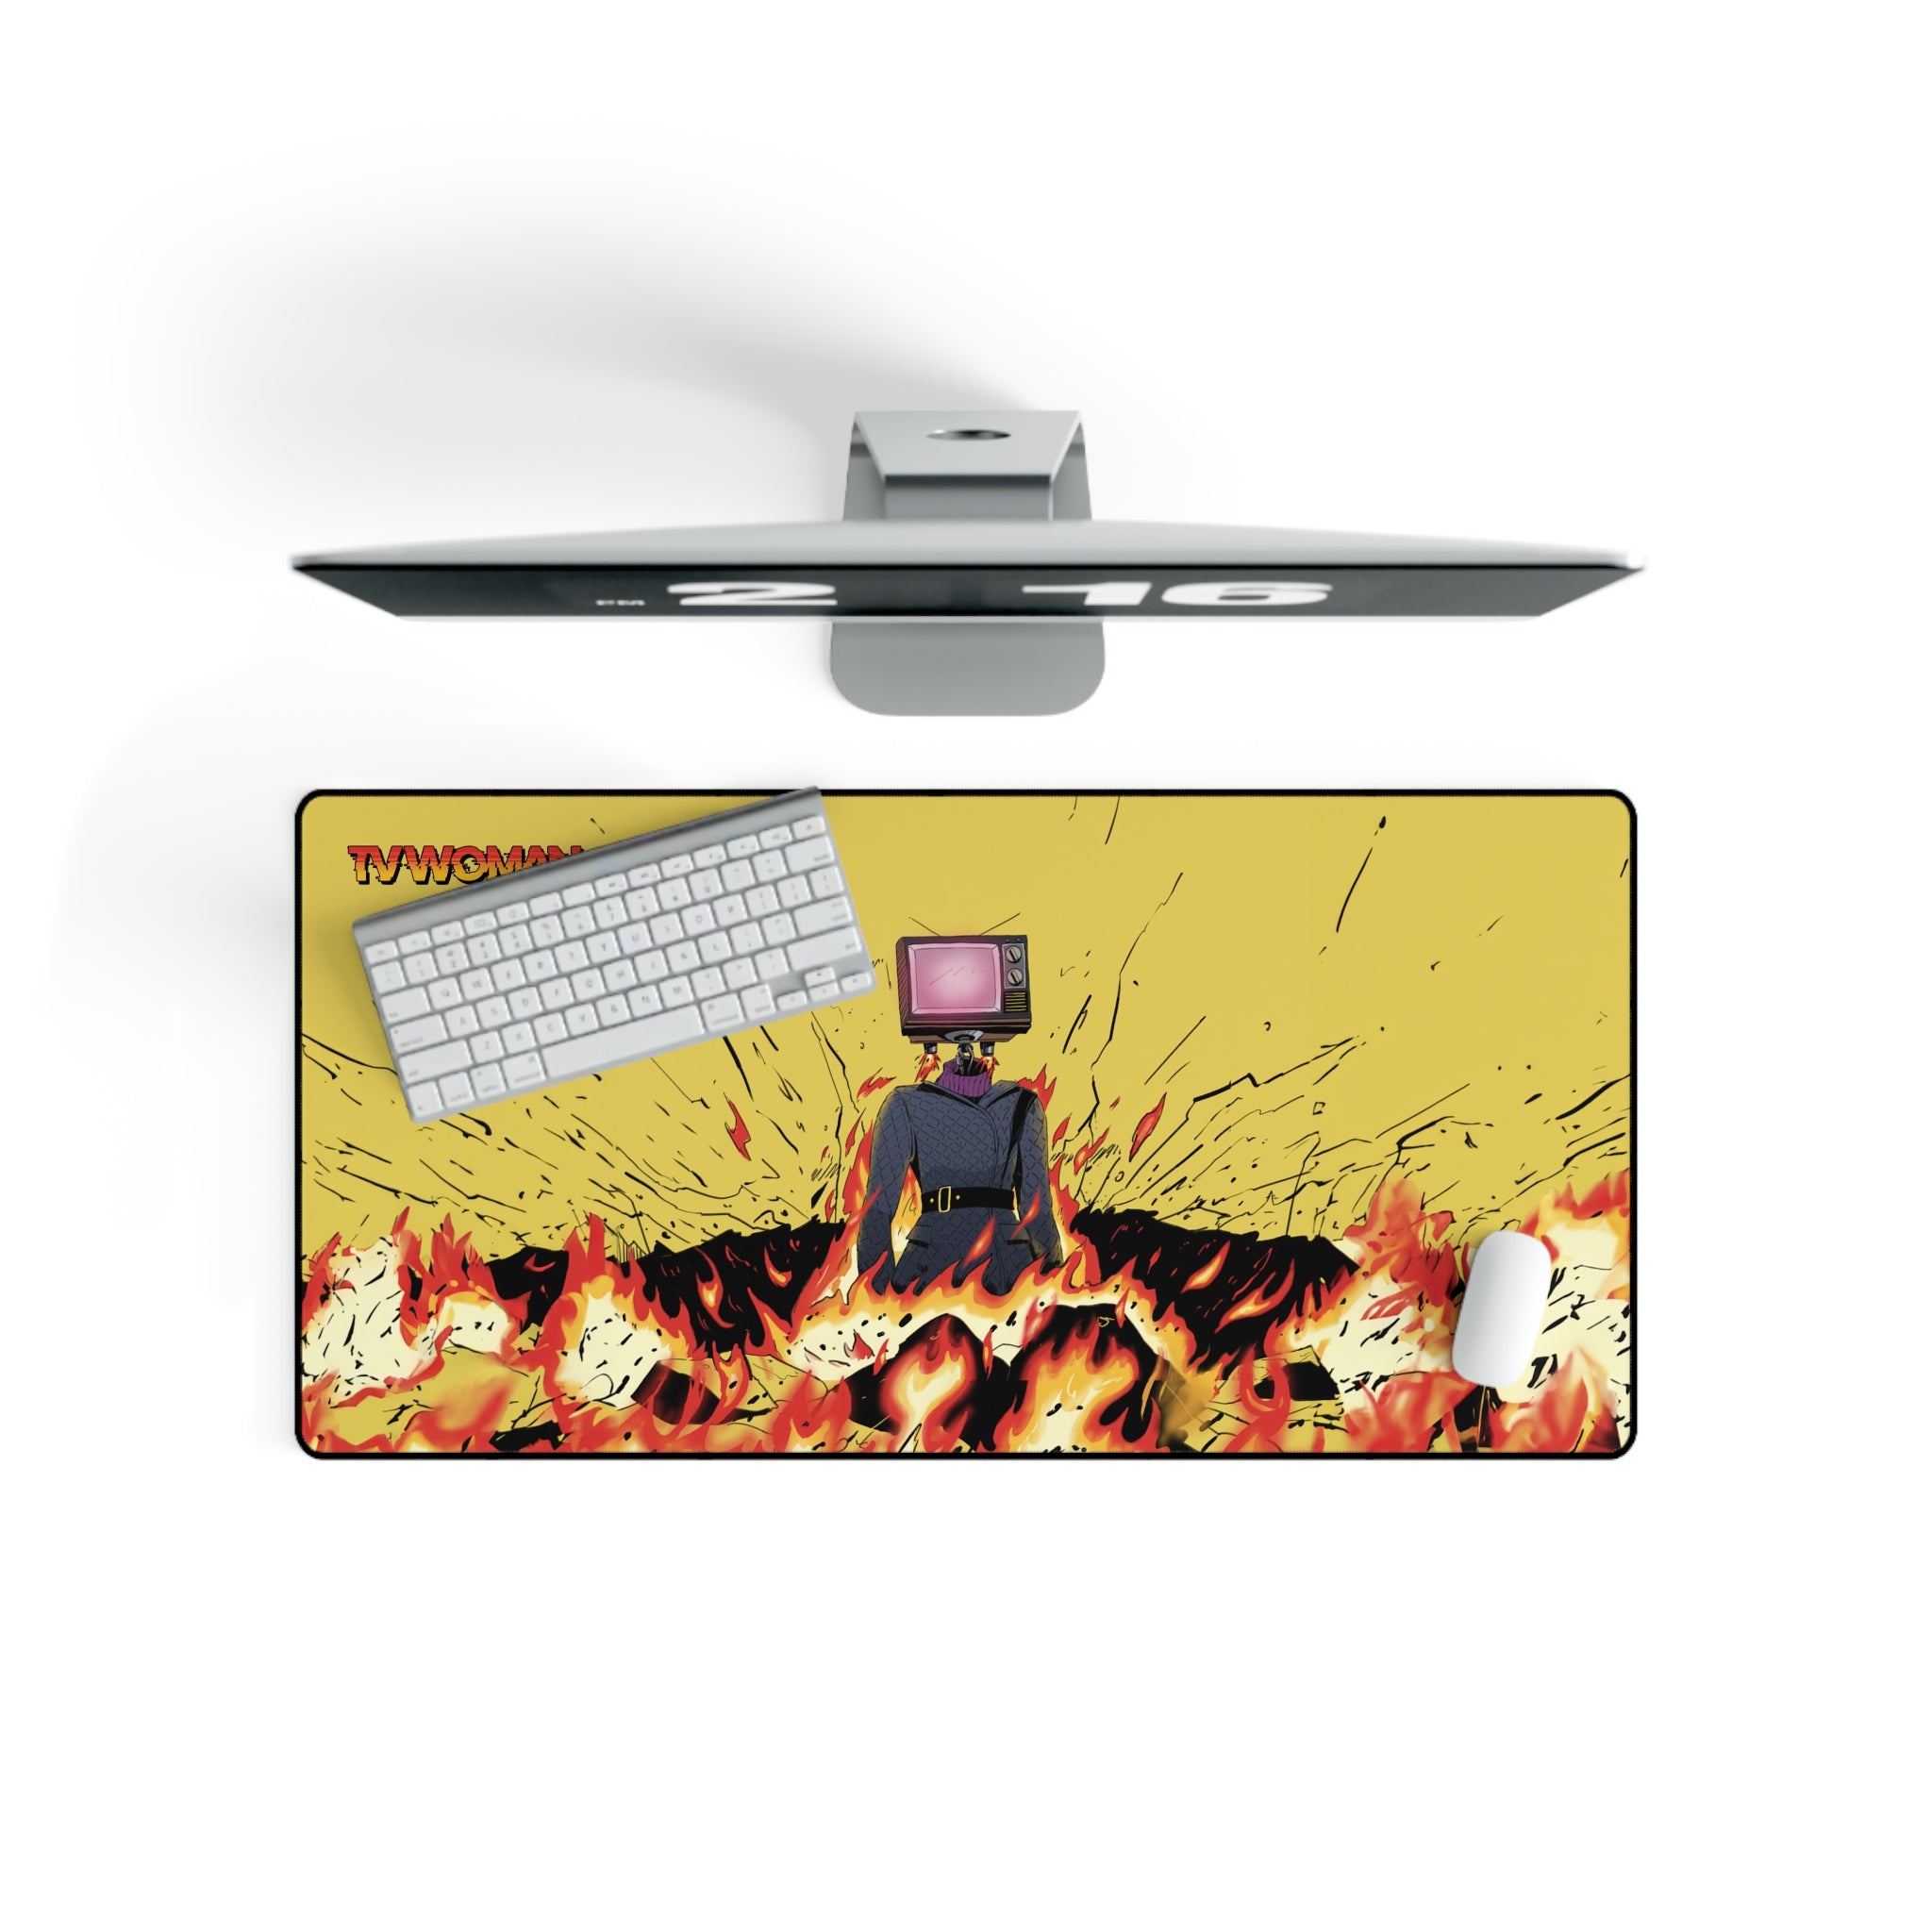 Wide gaming mouse pad featuring comic-style TV Woman illustration. with computer mouse keyboard